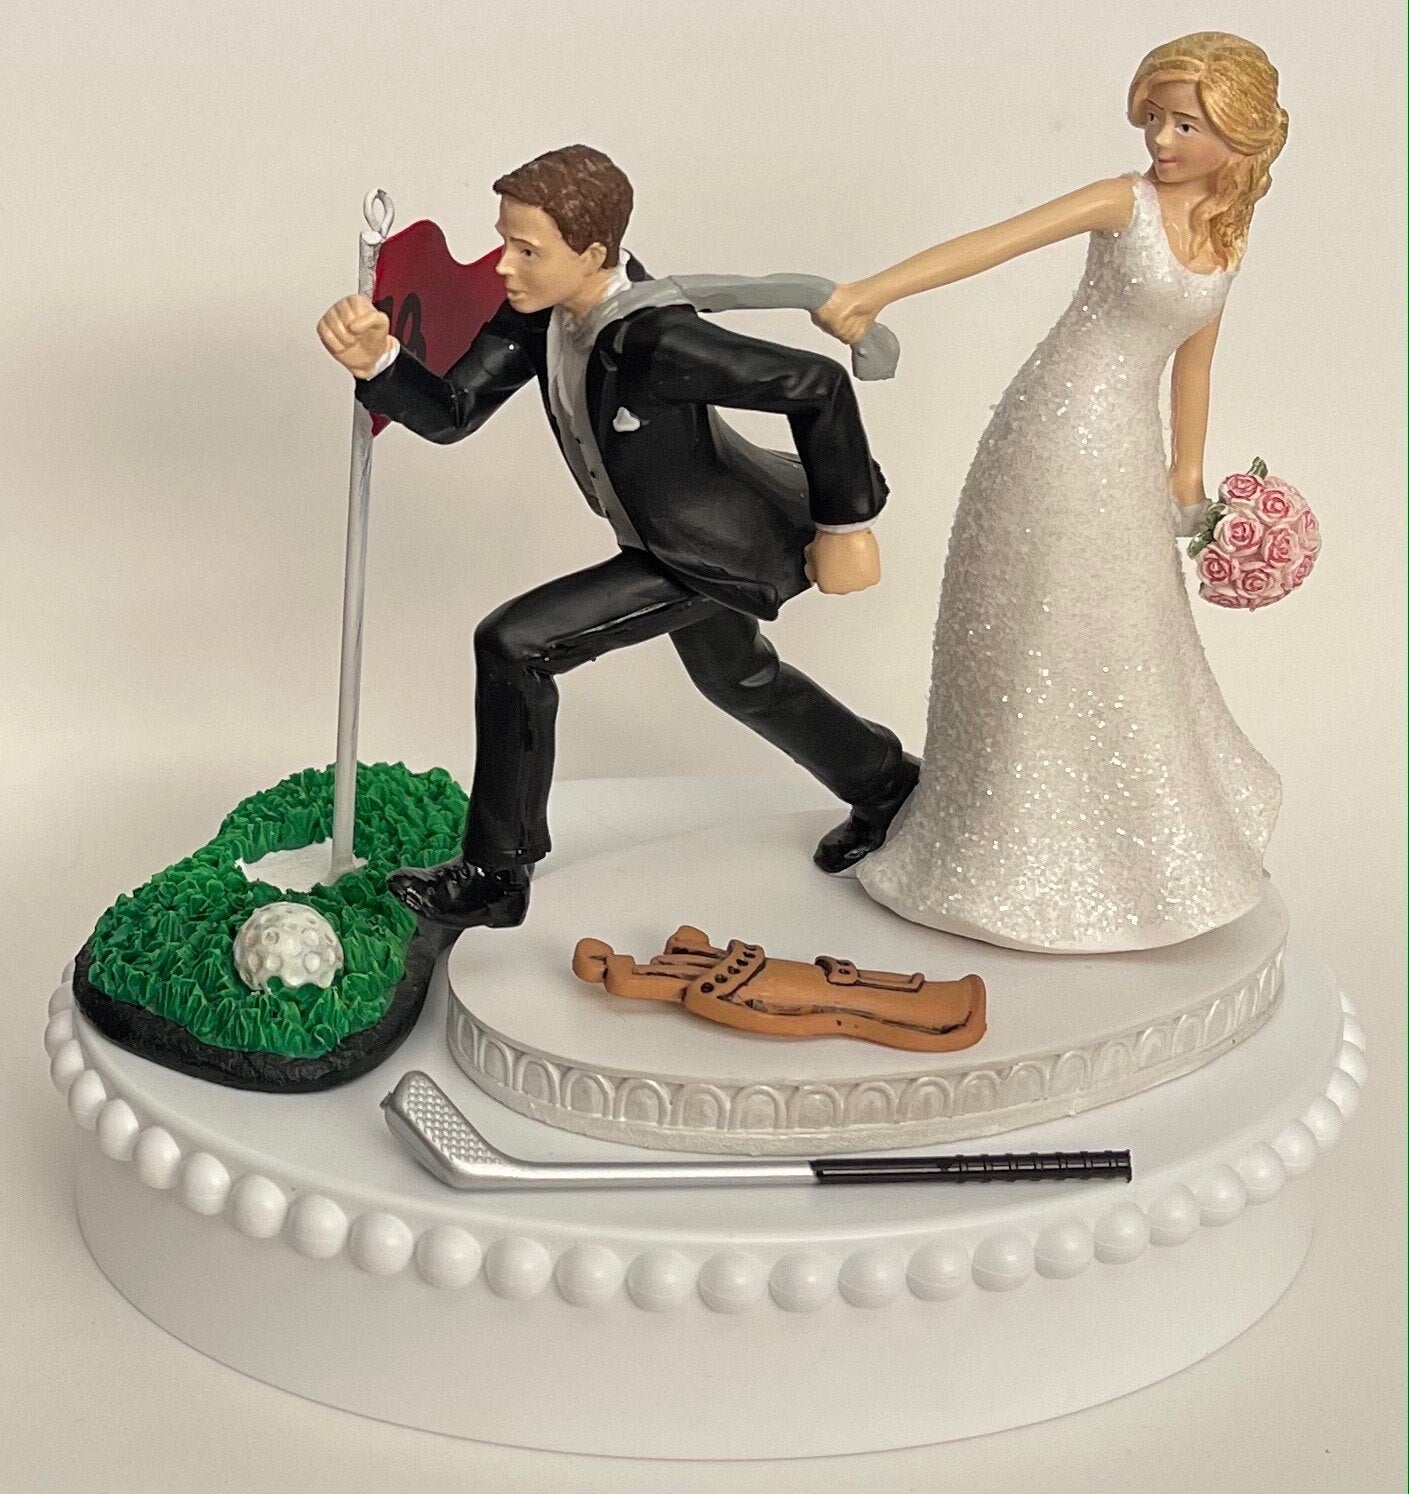 Wedding Cake Topper Golfing Golf Cart Sports Themed Running Humorous Bride Groom Funny 18th Hole Ball Clubs Green Fans Bridal Shower Gift